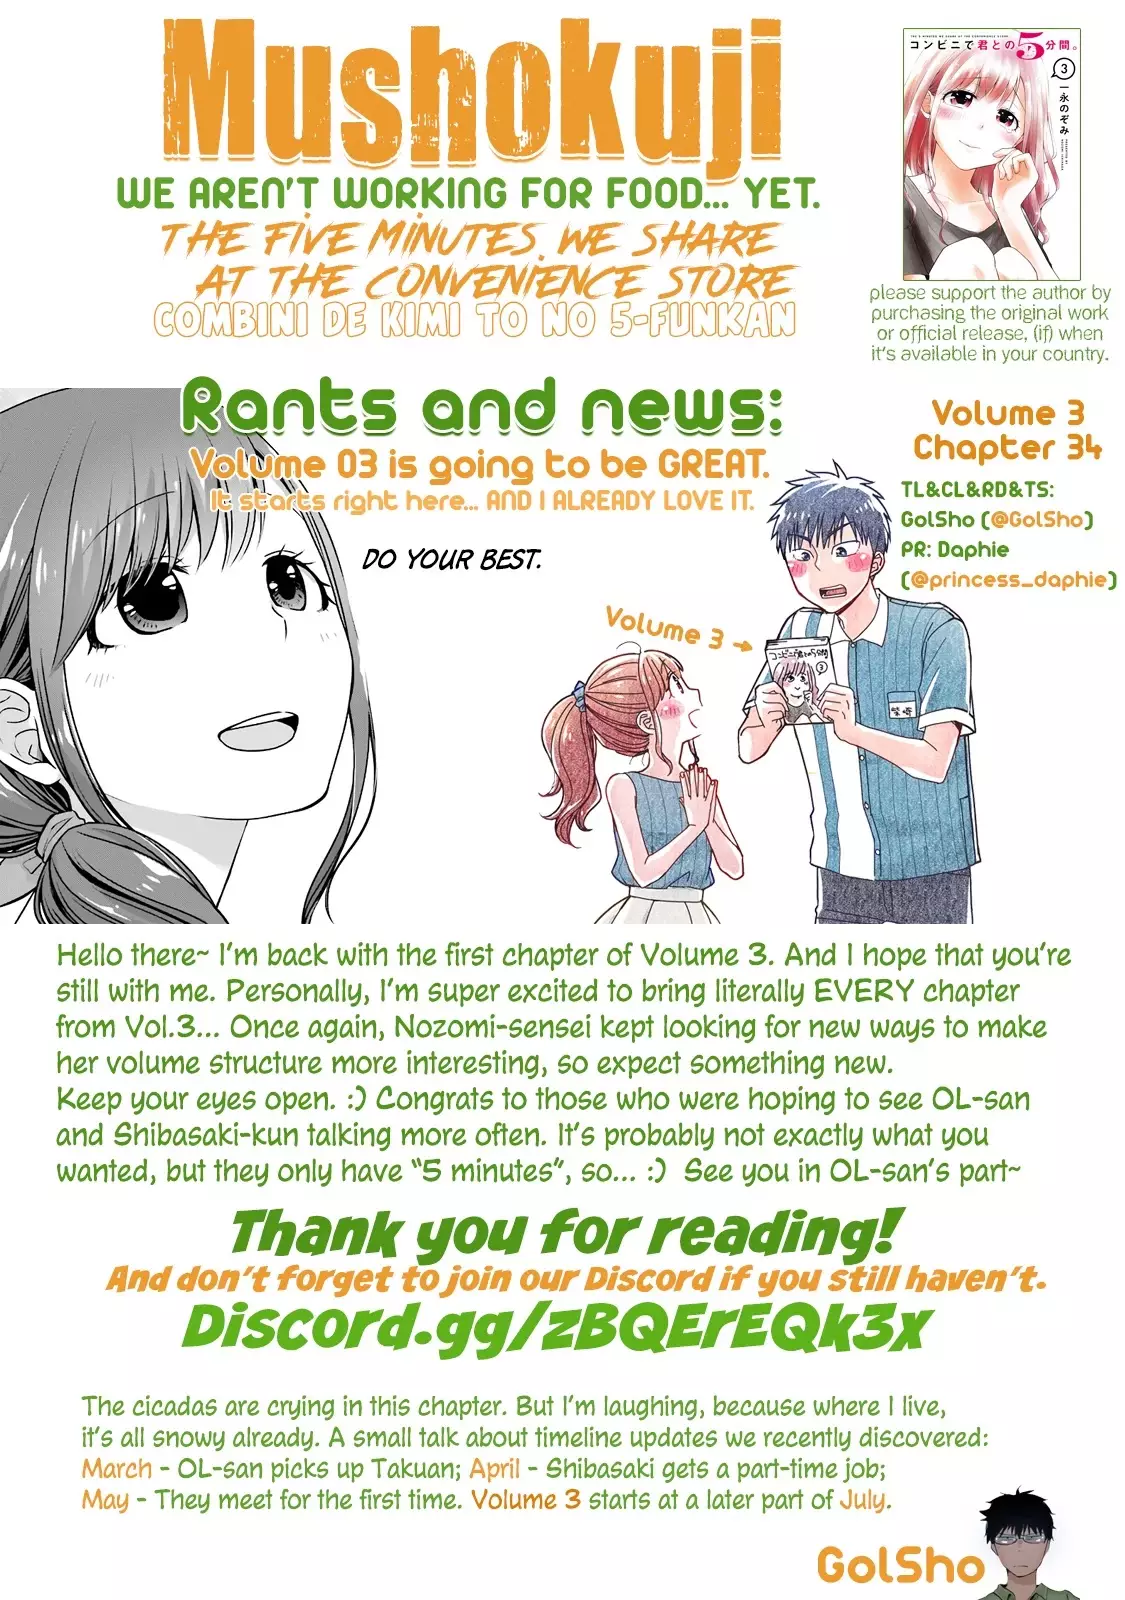 5 Minutes With You At A Convenience Store - 34 page 15